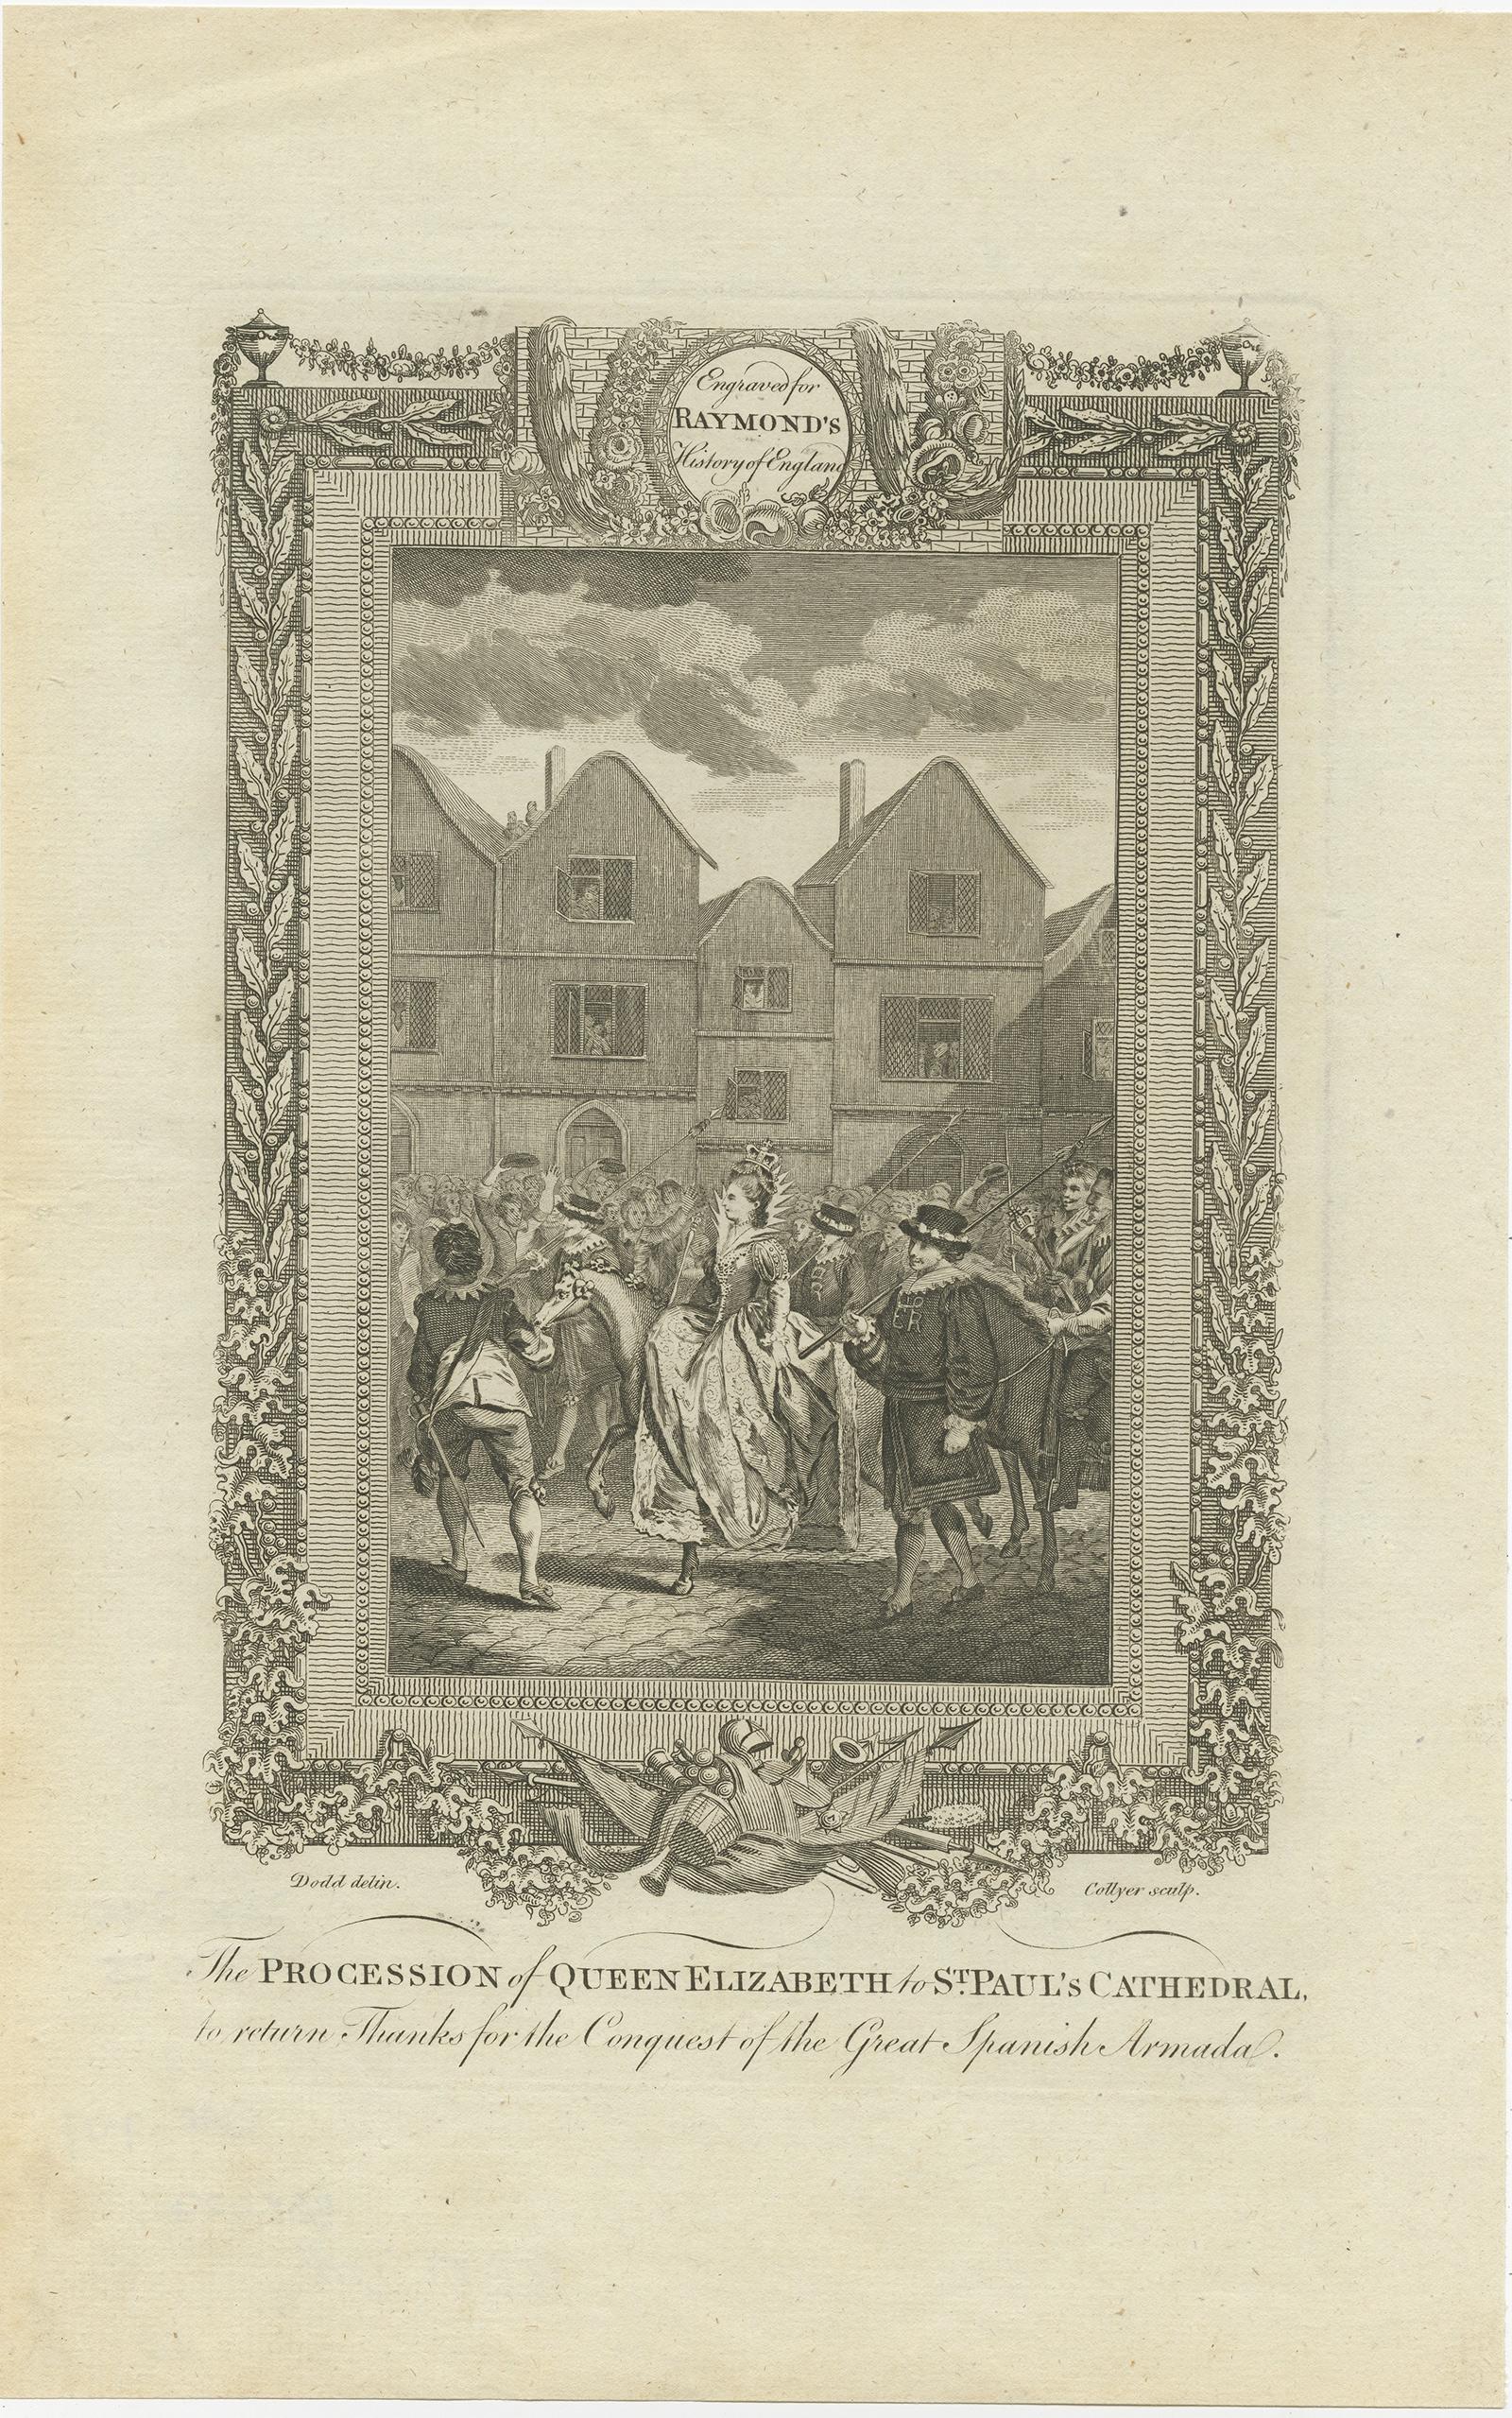 Paper Antique Print of the Procession of Queen Elizabeth by Raymond, C.1787 For Sale